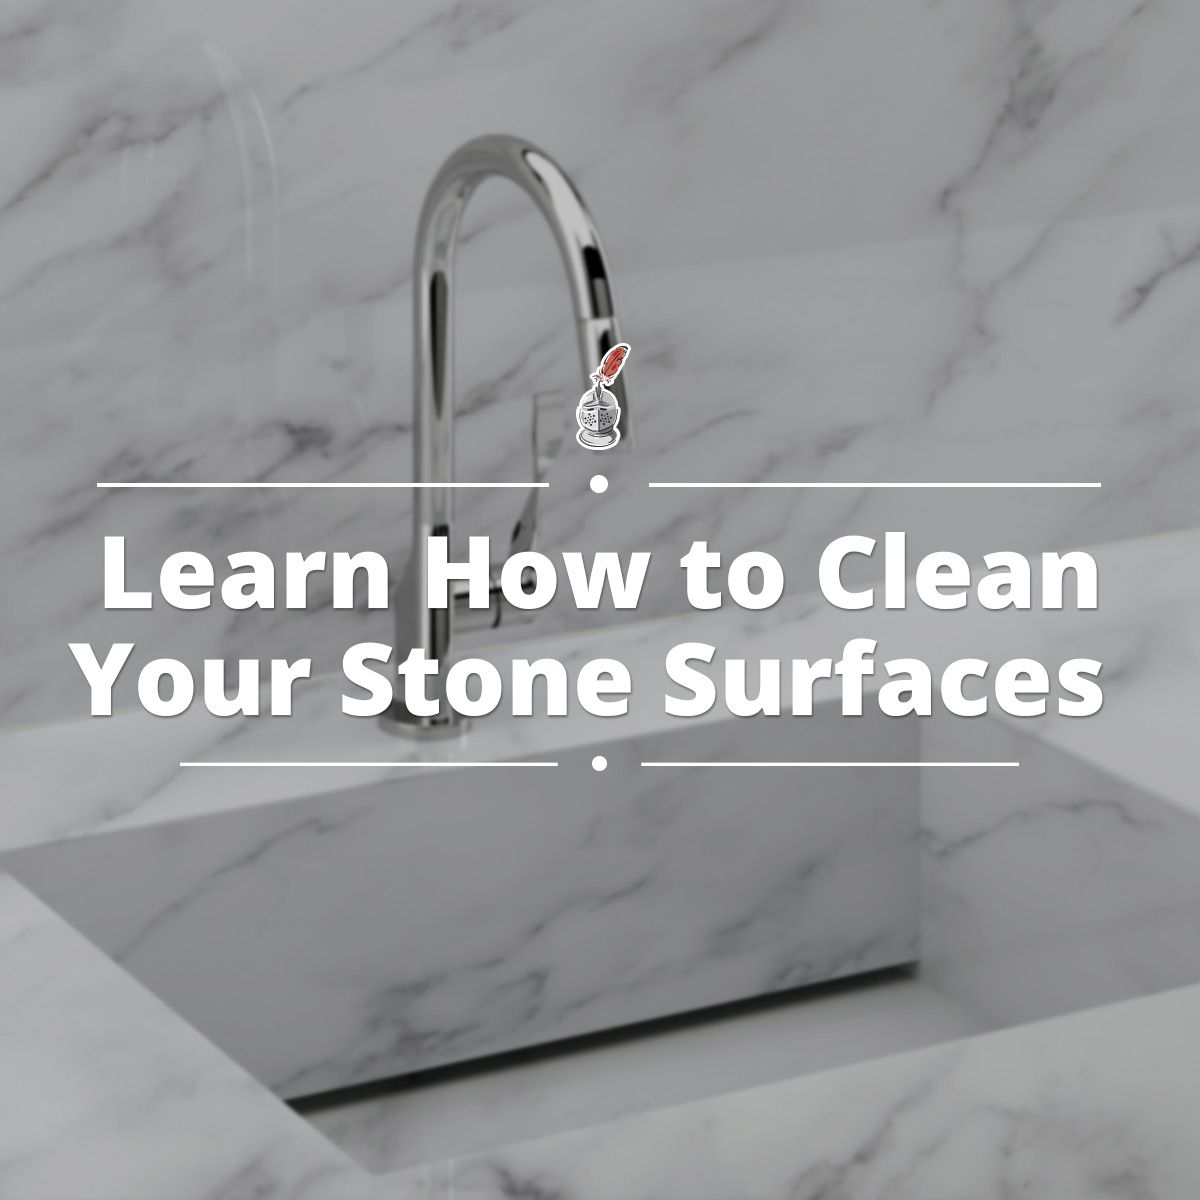 Learn How to Clean Your Stone Surfaces